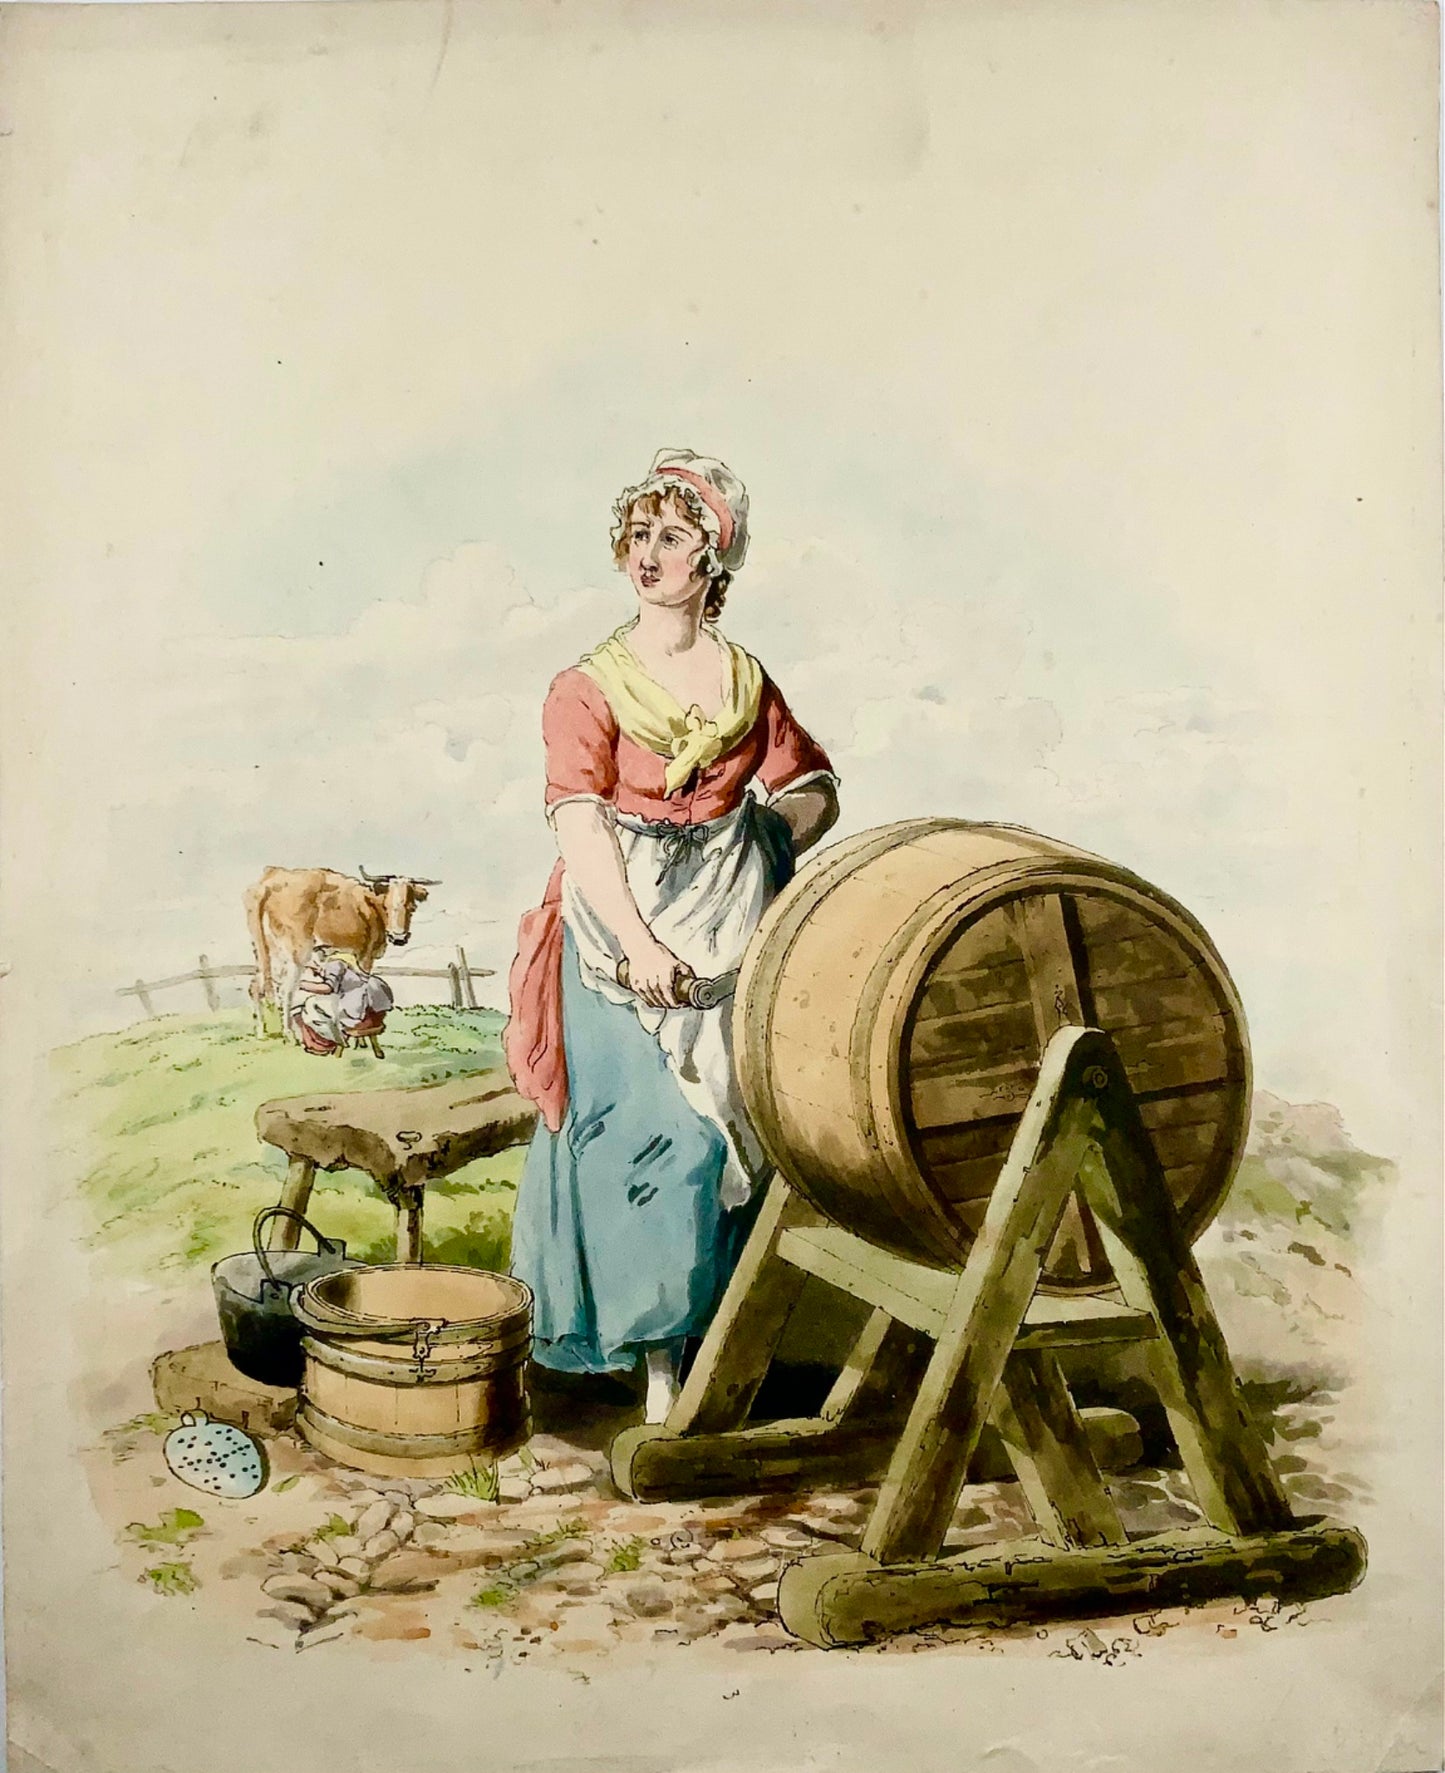 1805 Milk Maid, butter, milking, Wm Miller, folio aquatint with hand colour, agriculture, trades